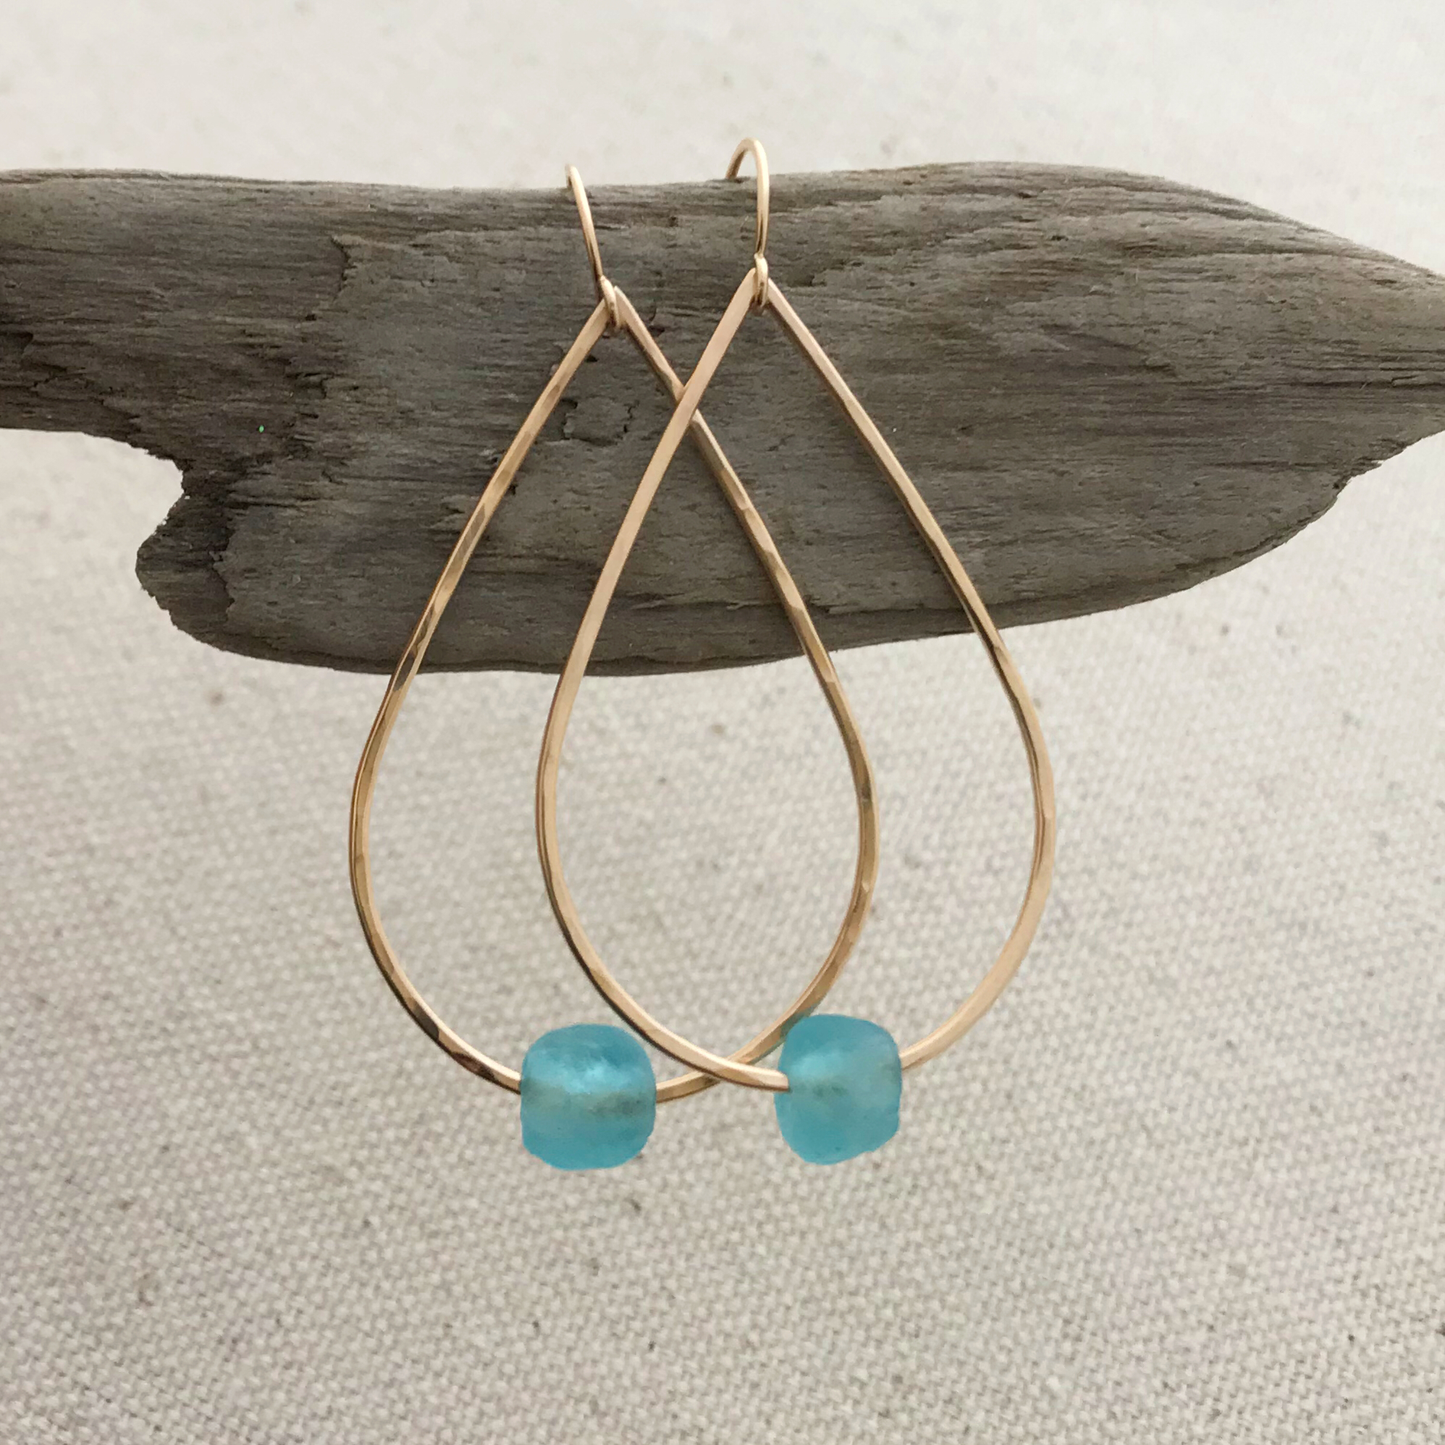 Teardrop Hoop Earrings with Single Floating Recycled Glass Bead - Turquoise Blue